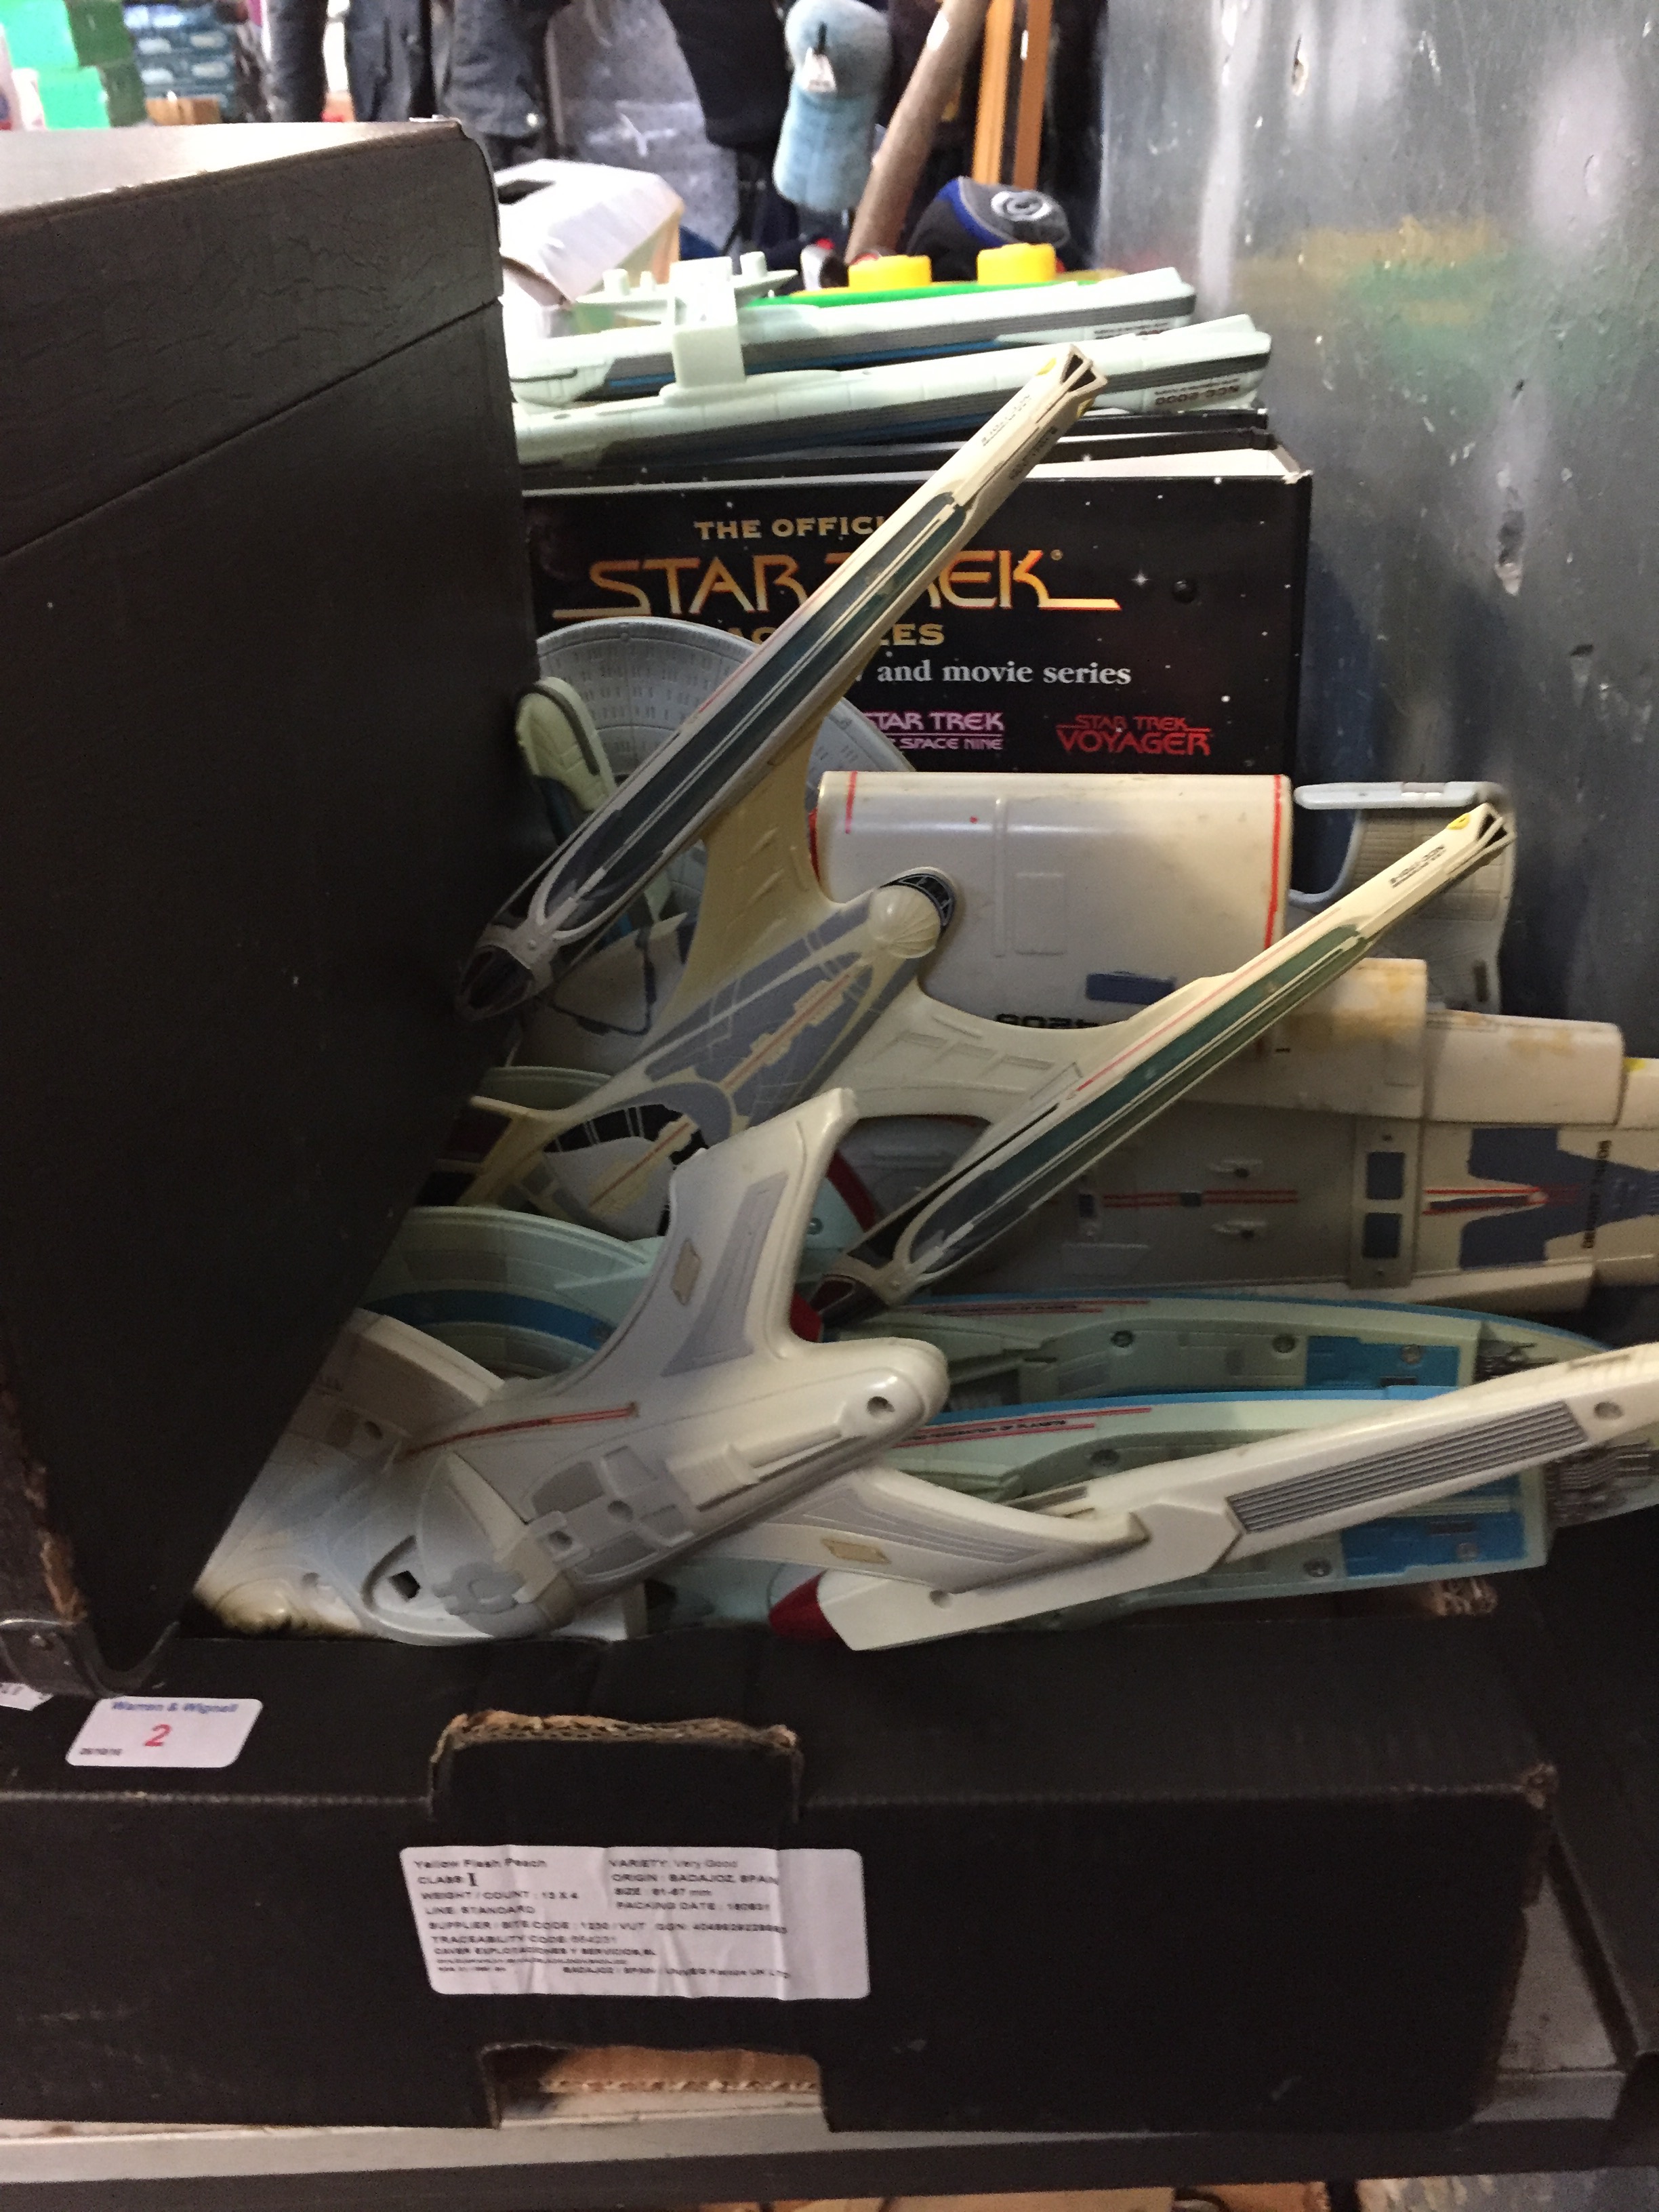 A BOX OF STAR TREK FACT FILES AND MODEL SPACECRAFT